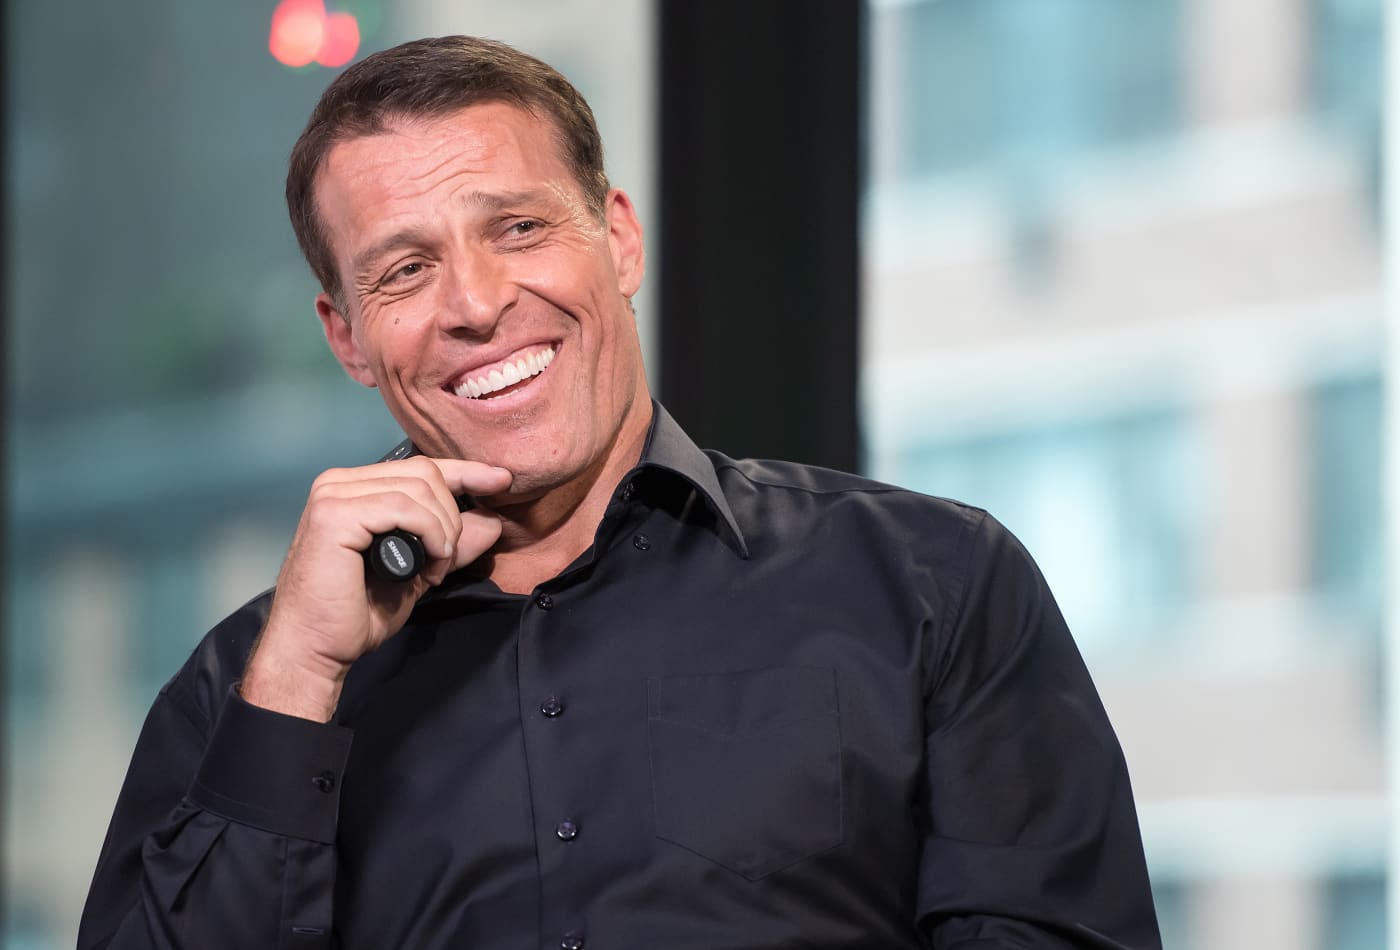 The 62-year old son of father (?) and mother(?) Tony Robbins in 2022 photo. Tony Robbins earned a  million dollar salary - leaving the net worth at  million in 2022